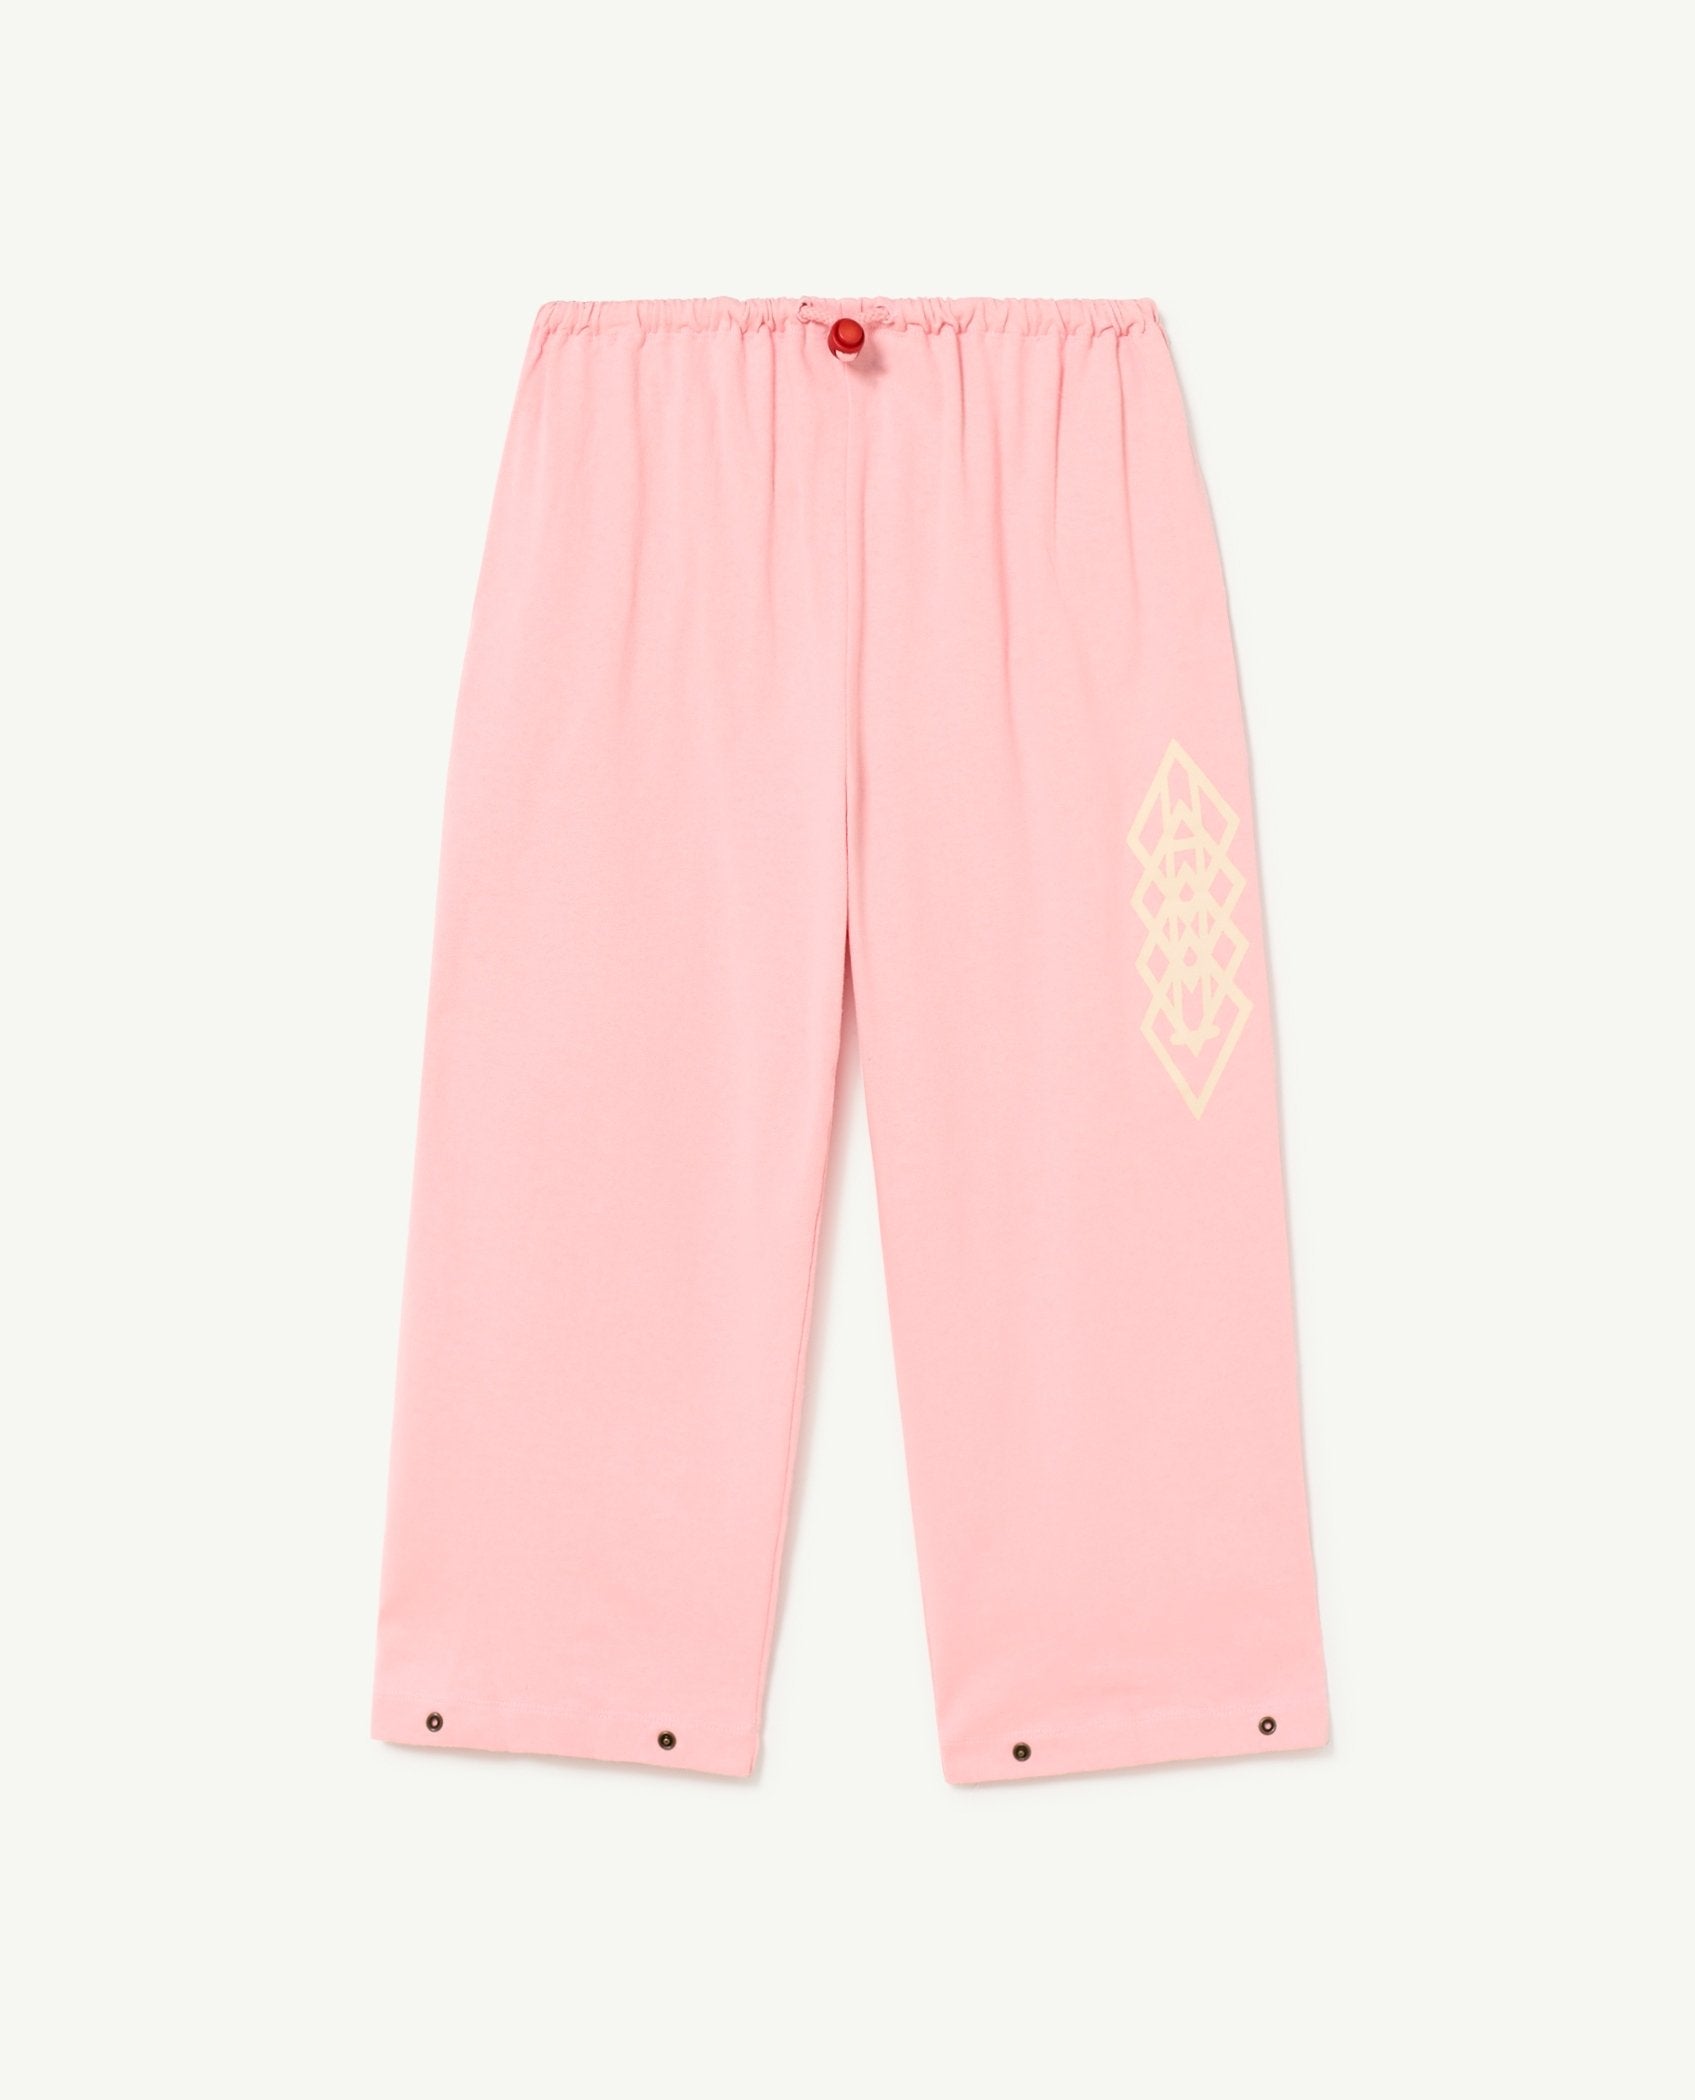 Pink Stag Sweatpants PRODUCT FRONT